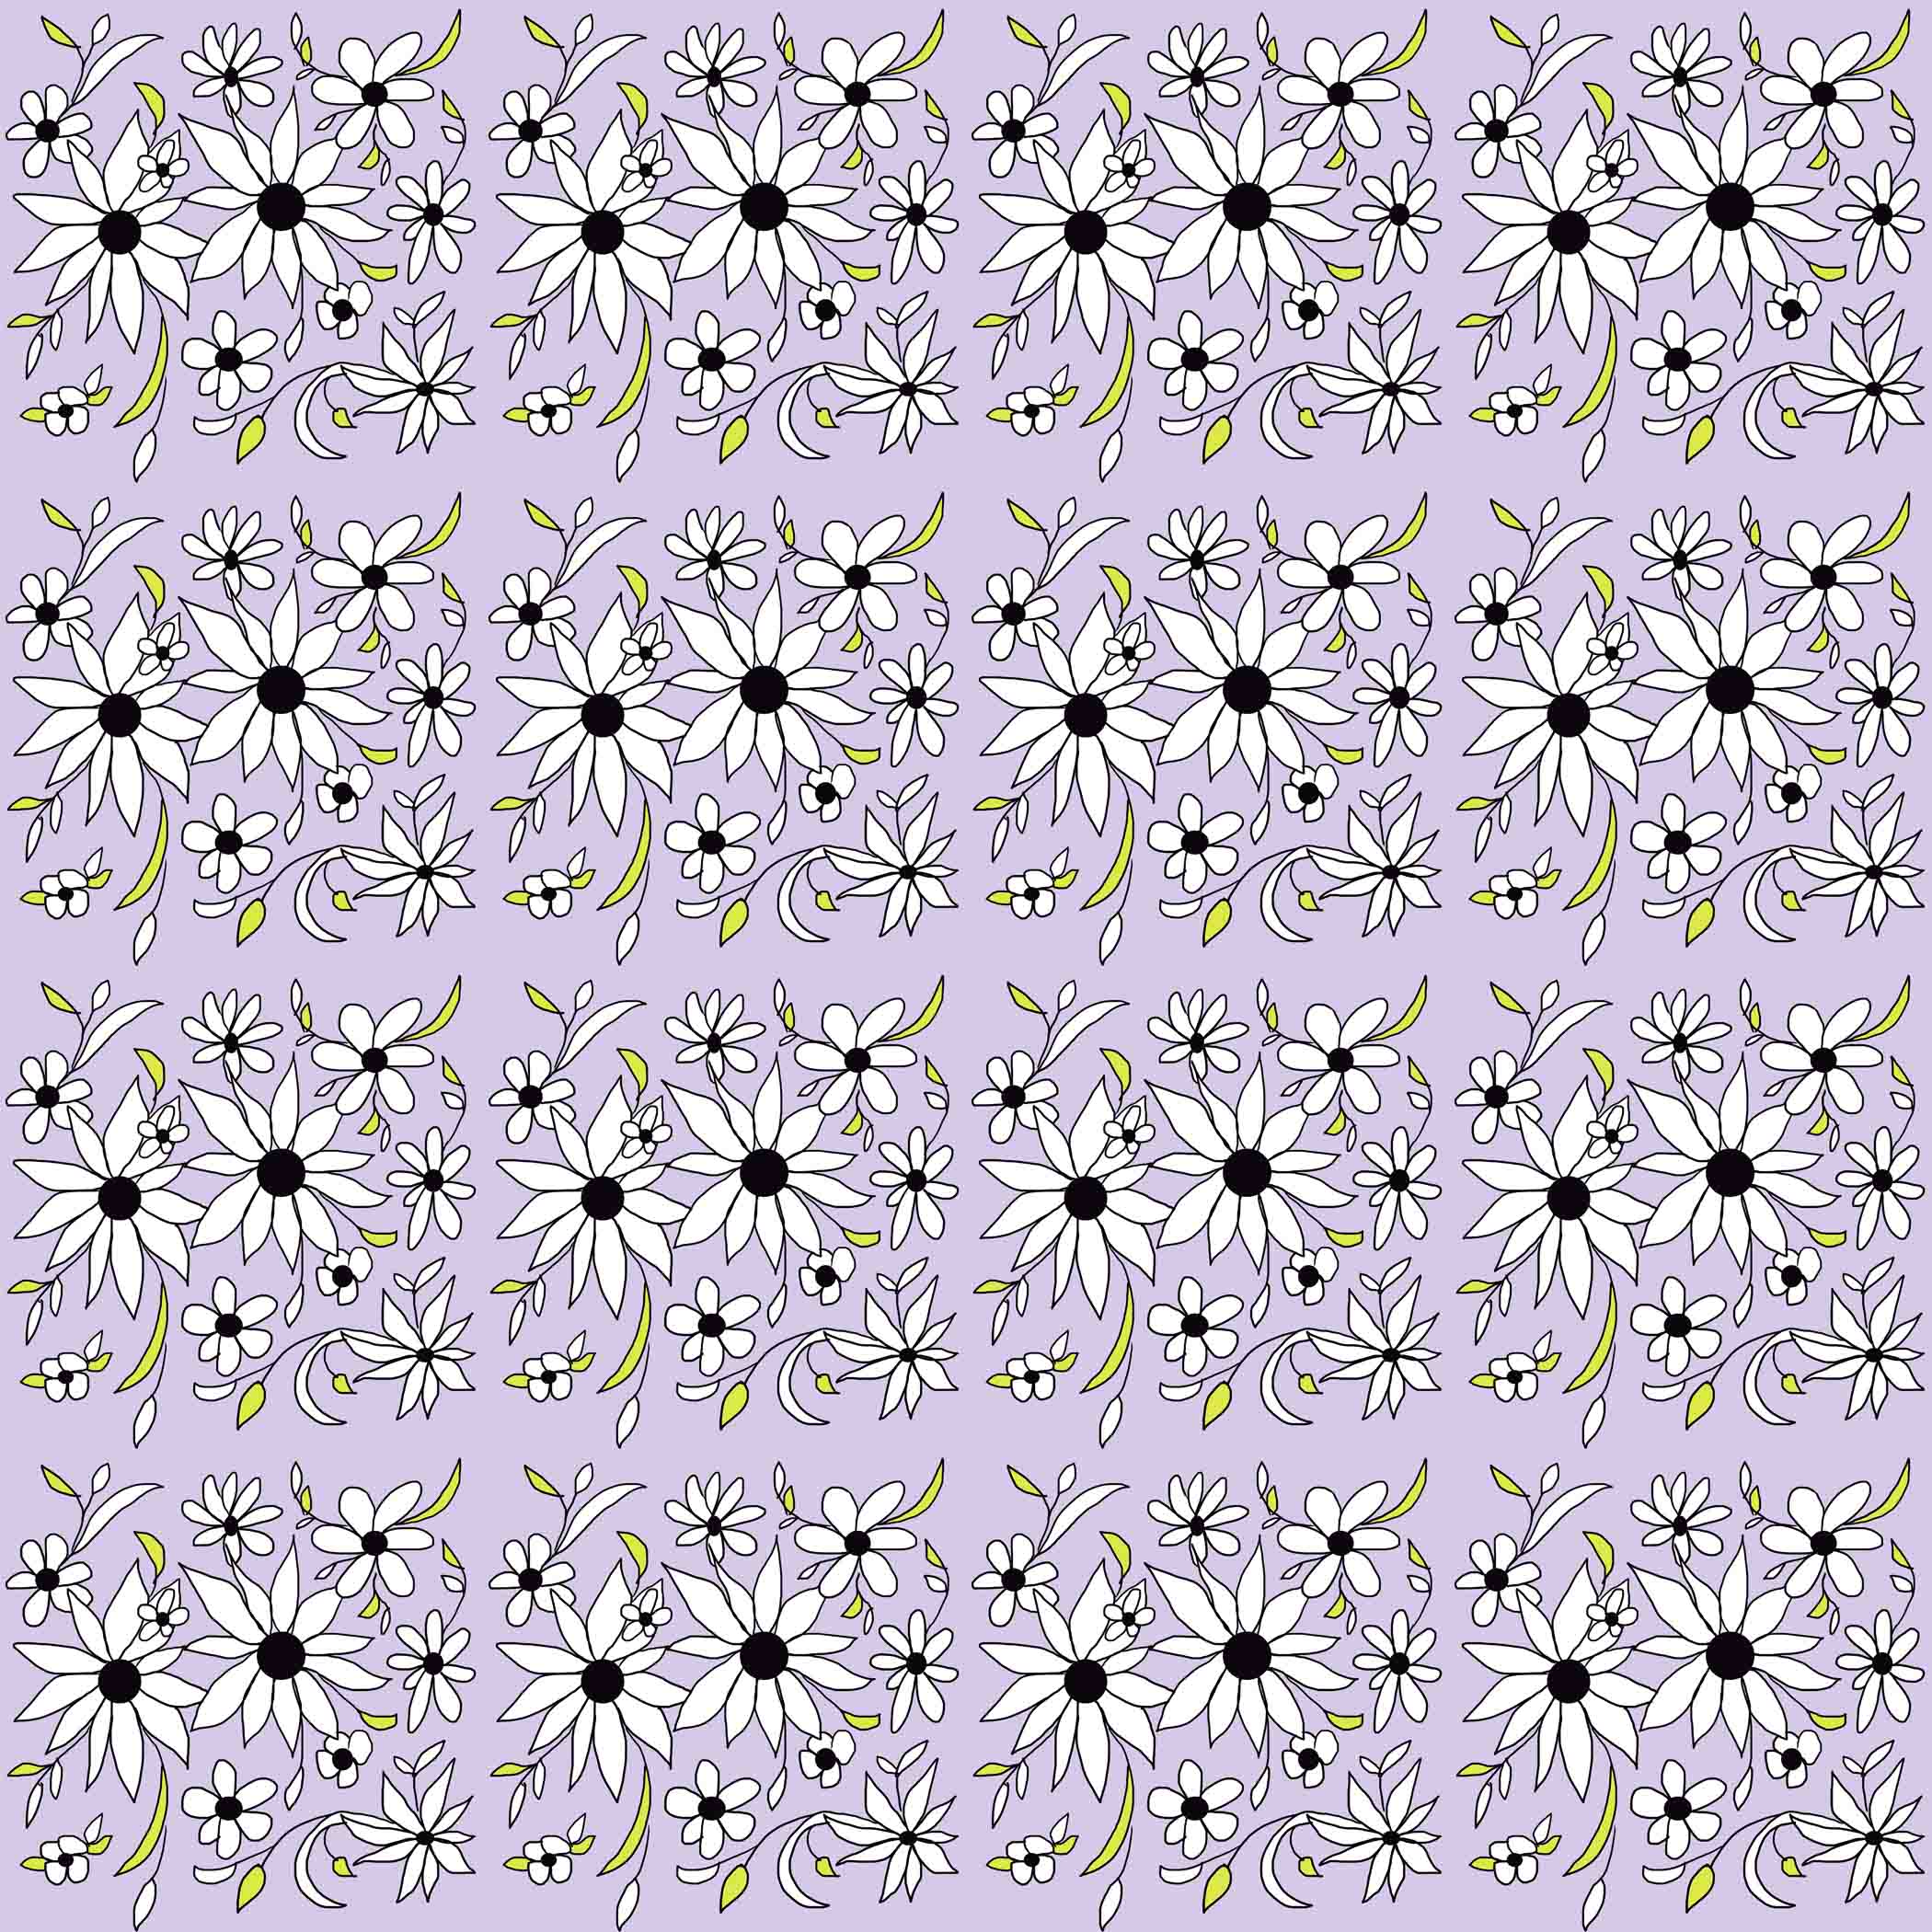 art every day number 599 / illustration & pattern / a thousand flowers plus one (purple)